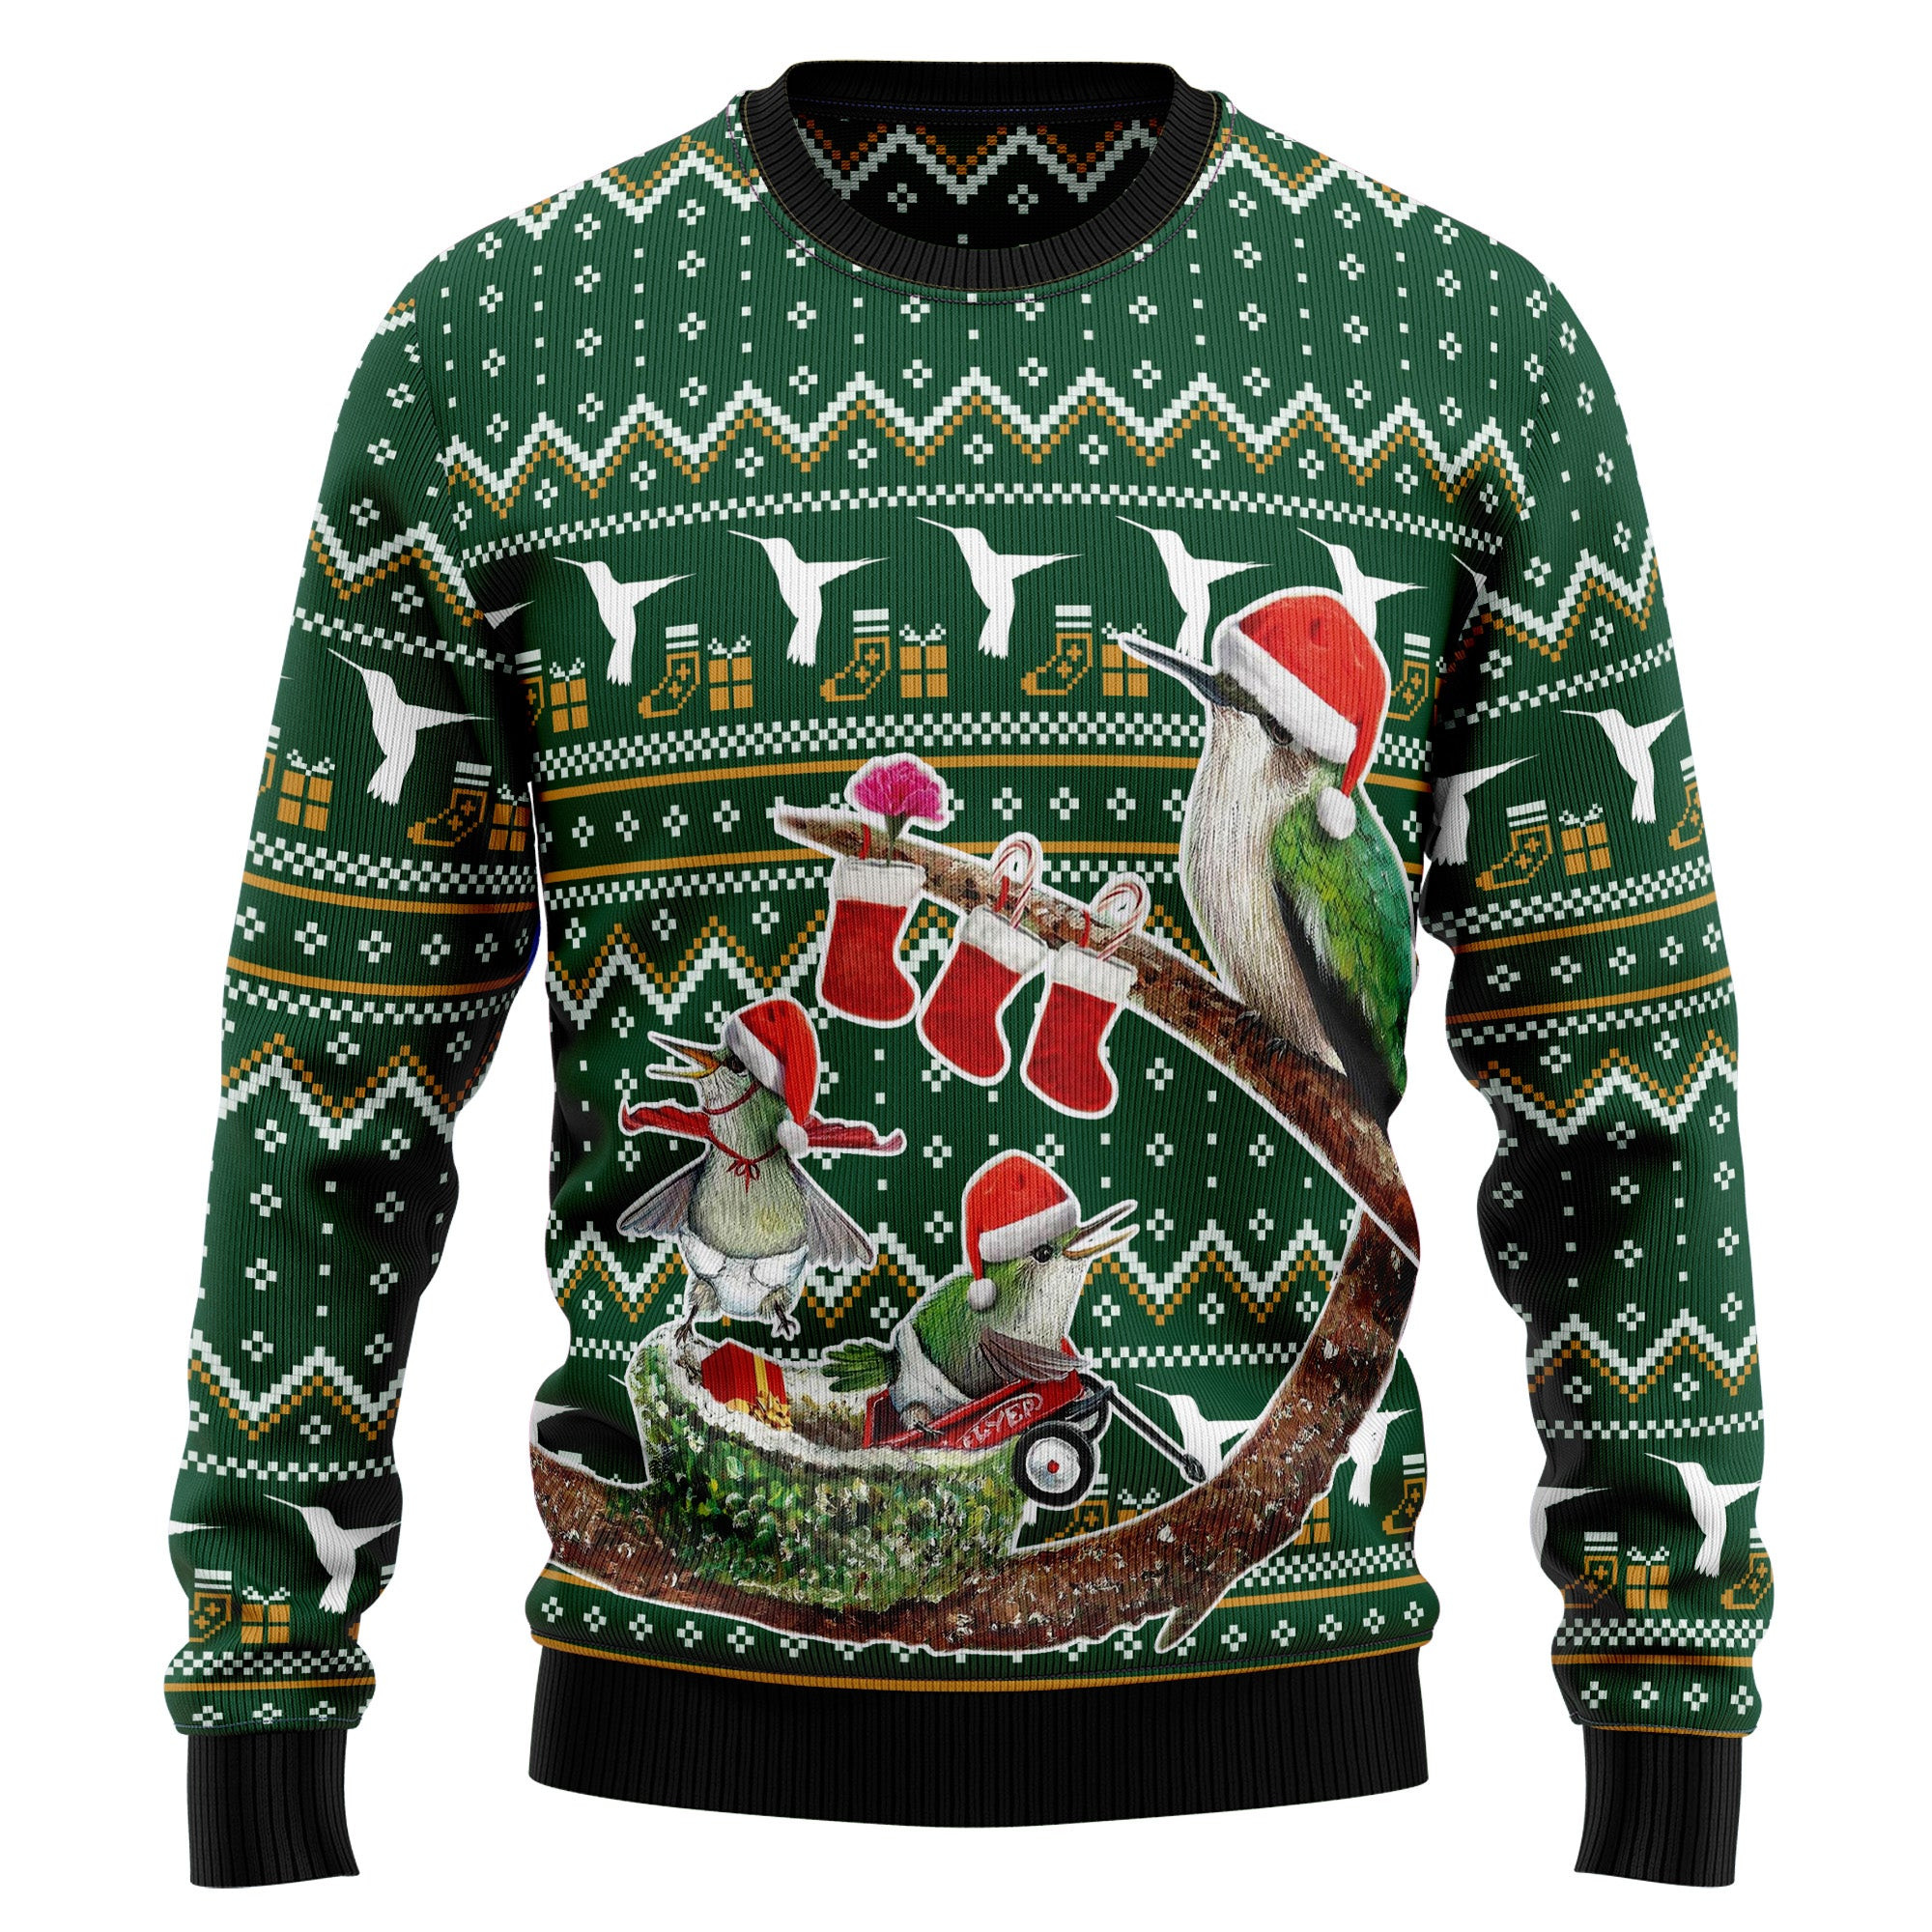 Hummingbird Family Xmas Ugly Christmas Sweater, Ugly Sweater For Men Women, Holiday Sweater